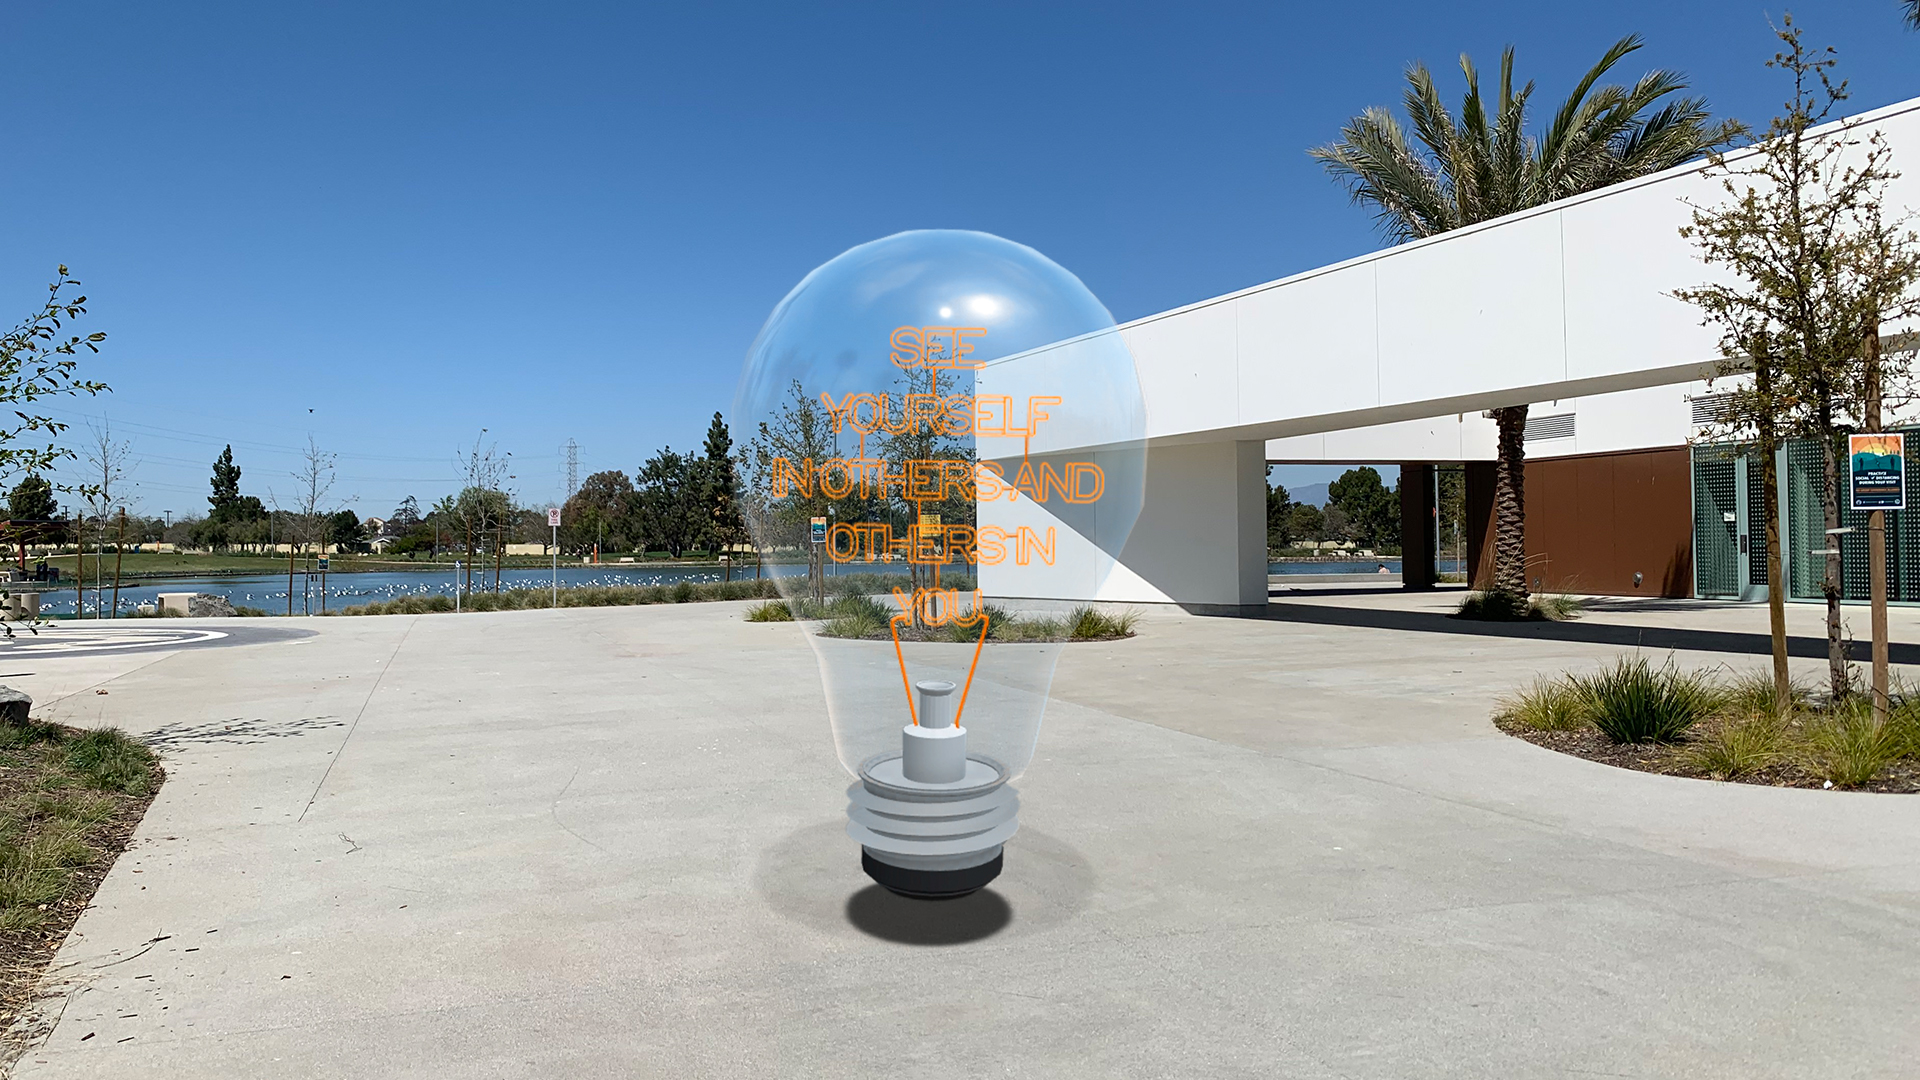 A giant lightbulb with writing on it floats on a concrete plaza with a building and a lake in the background